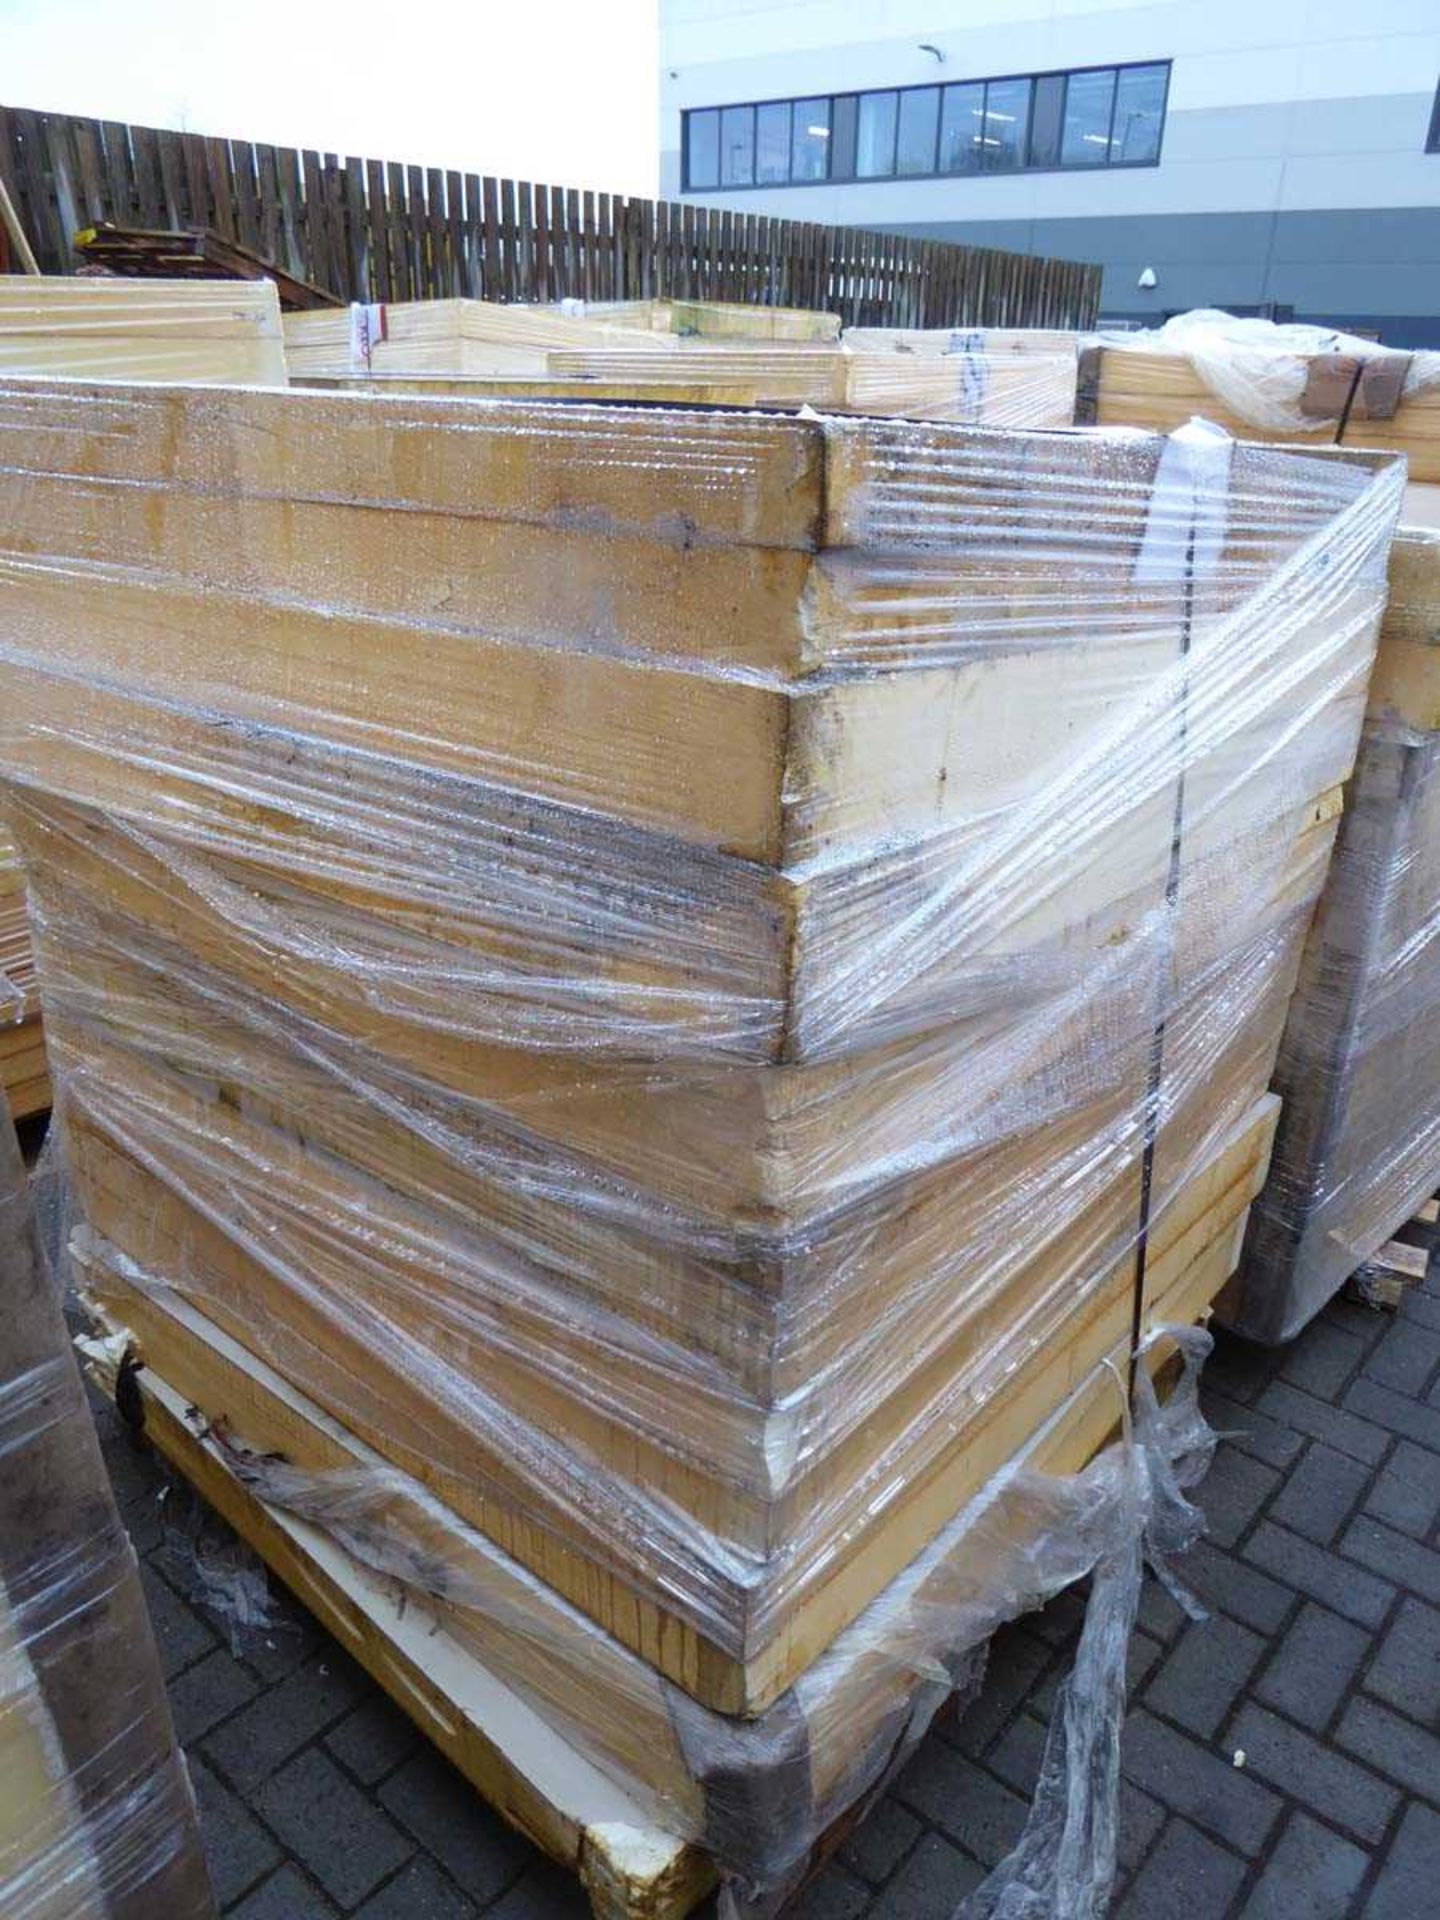 Pallet of tapered Celotex insulation board